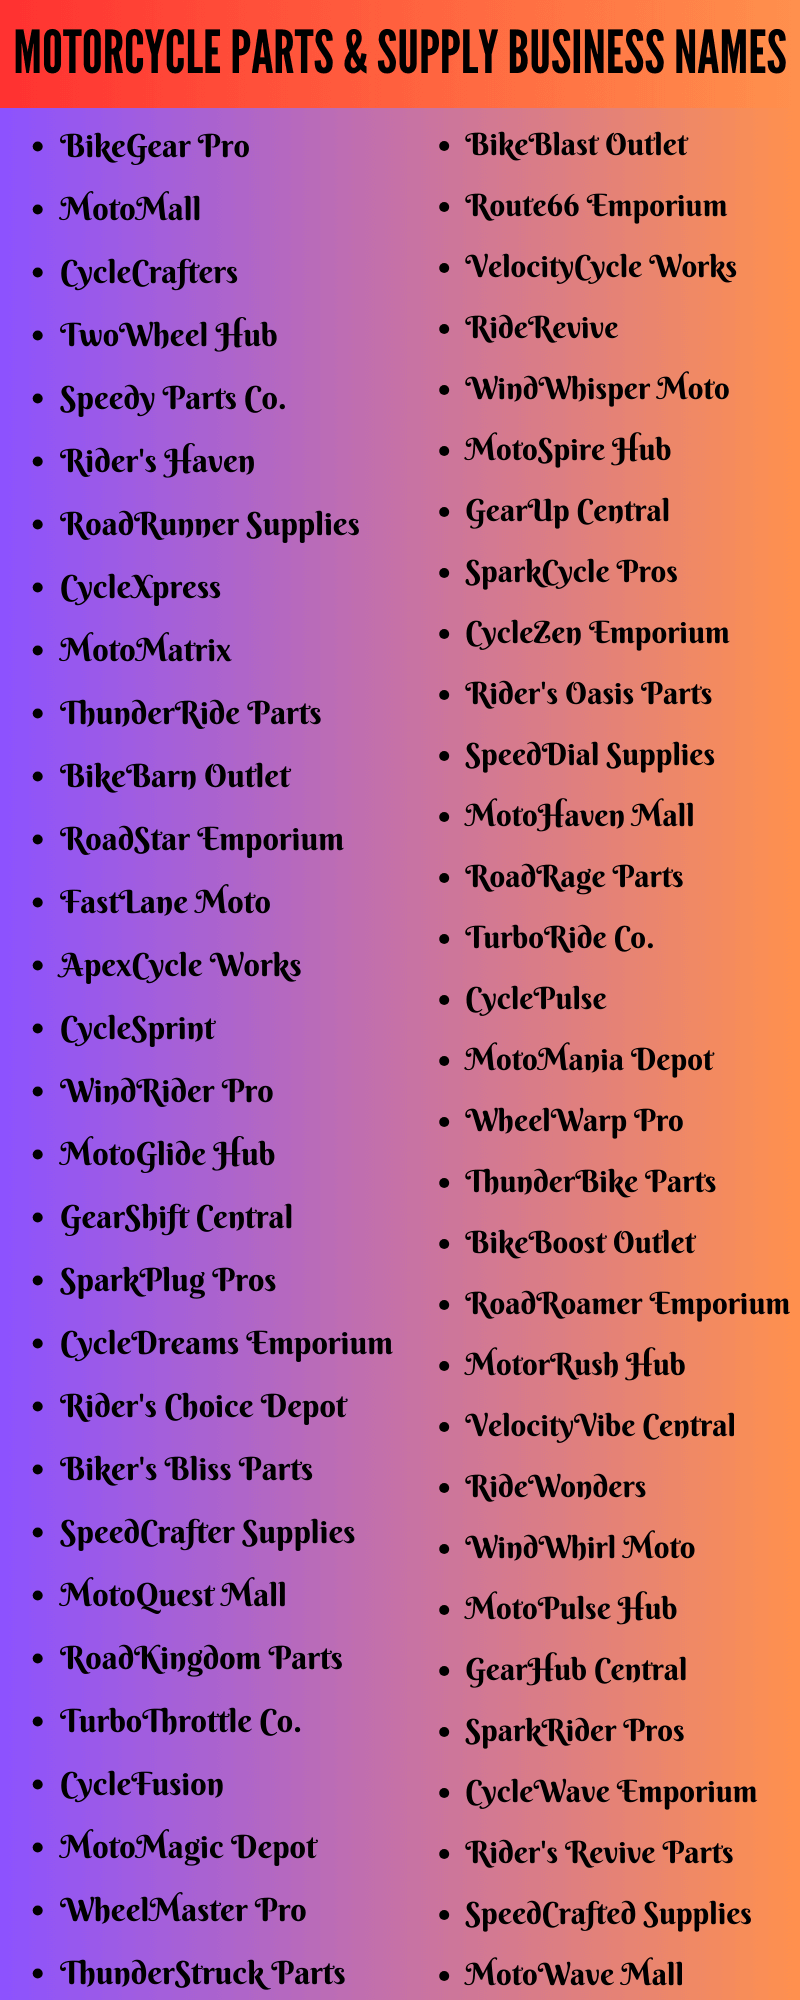 Motorcycle Parts & Supply Business Names